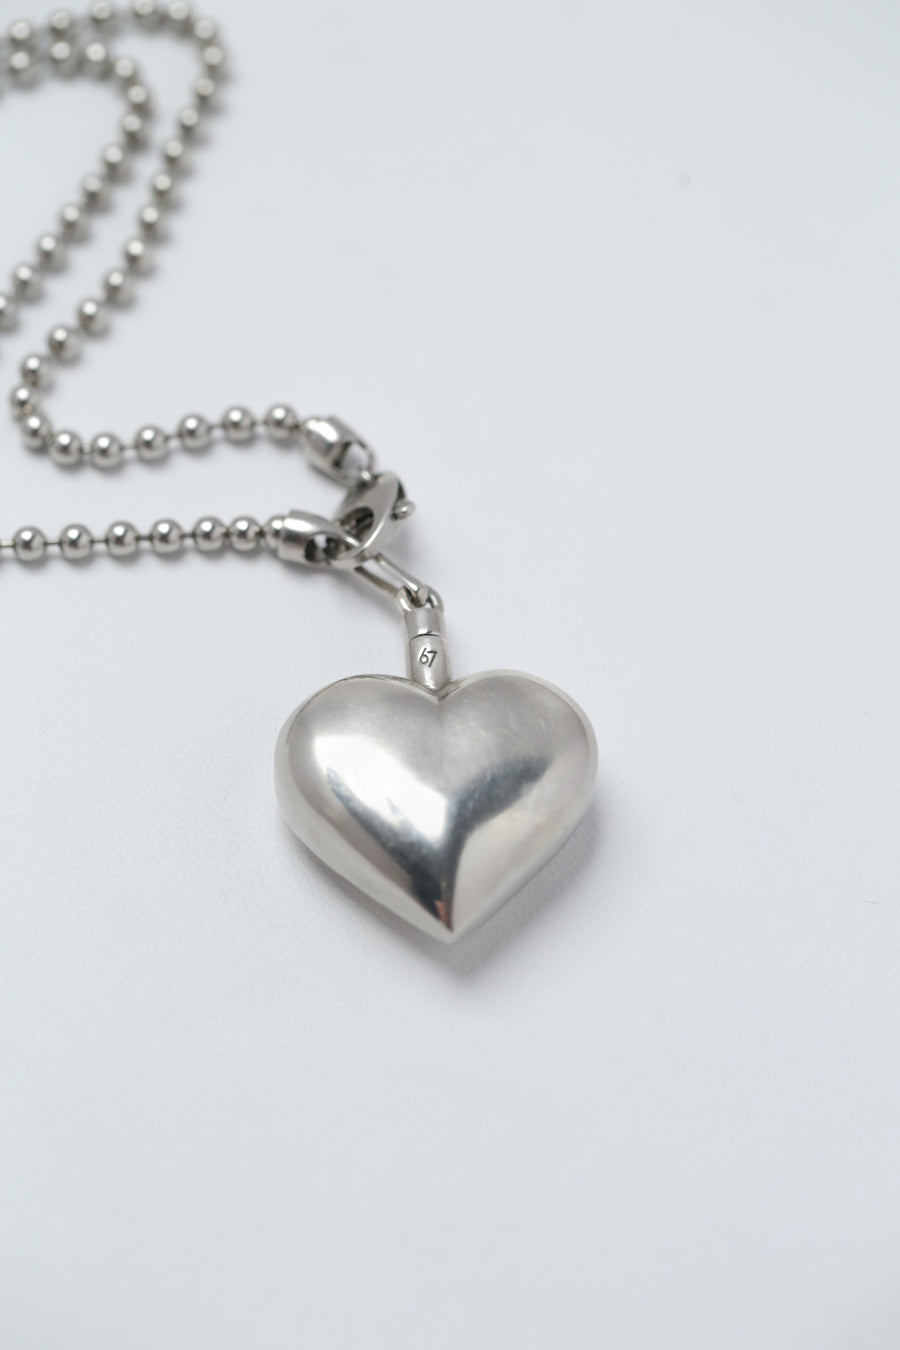 The Heart Necklace II